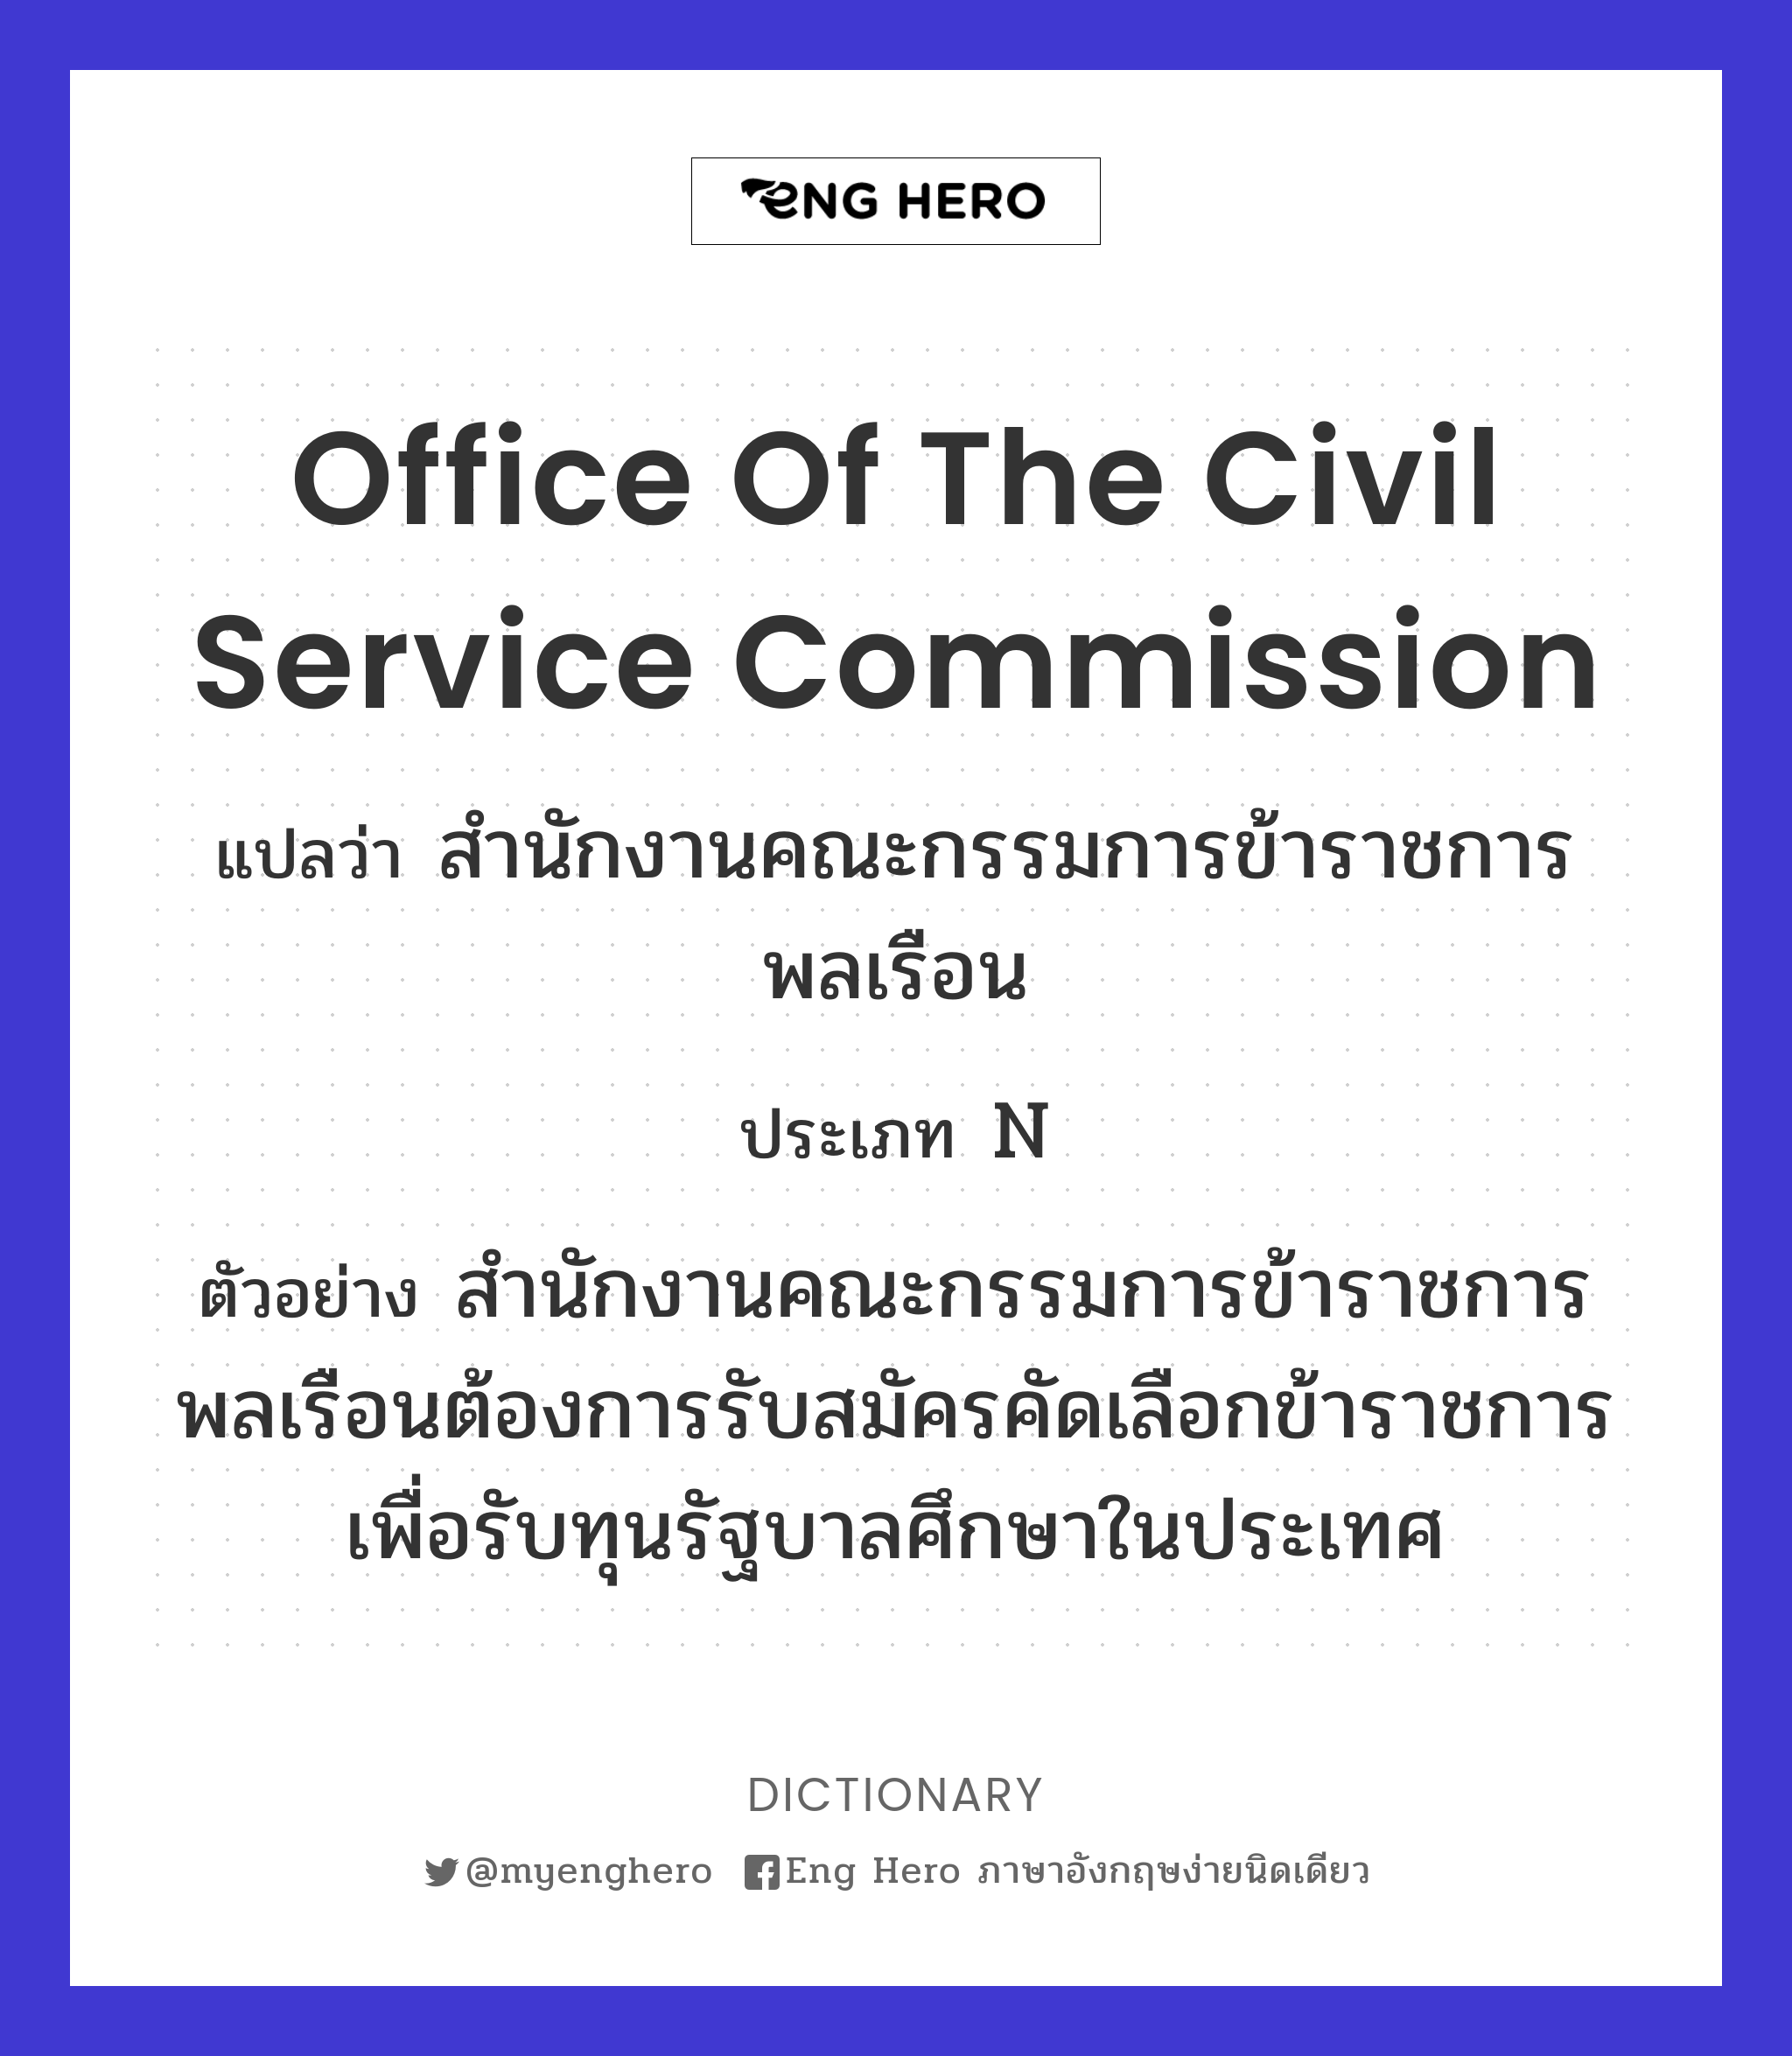 Office of the Civil Service Commission